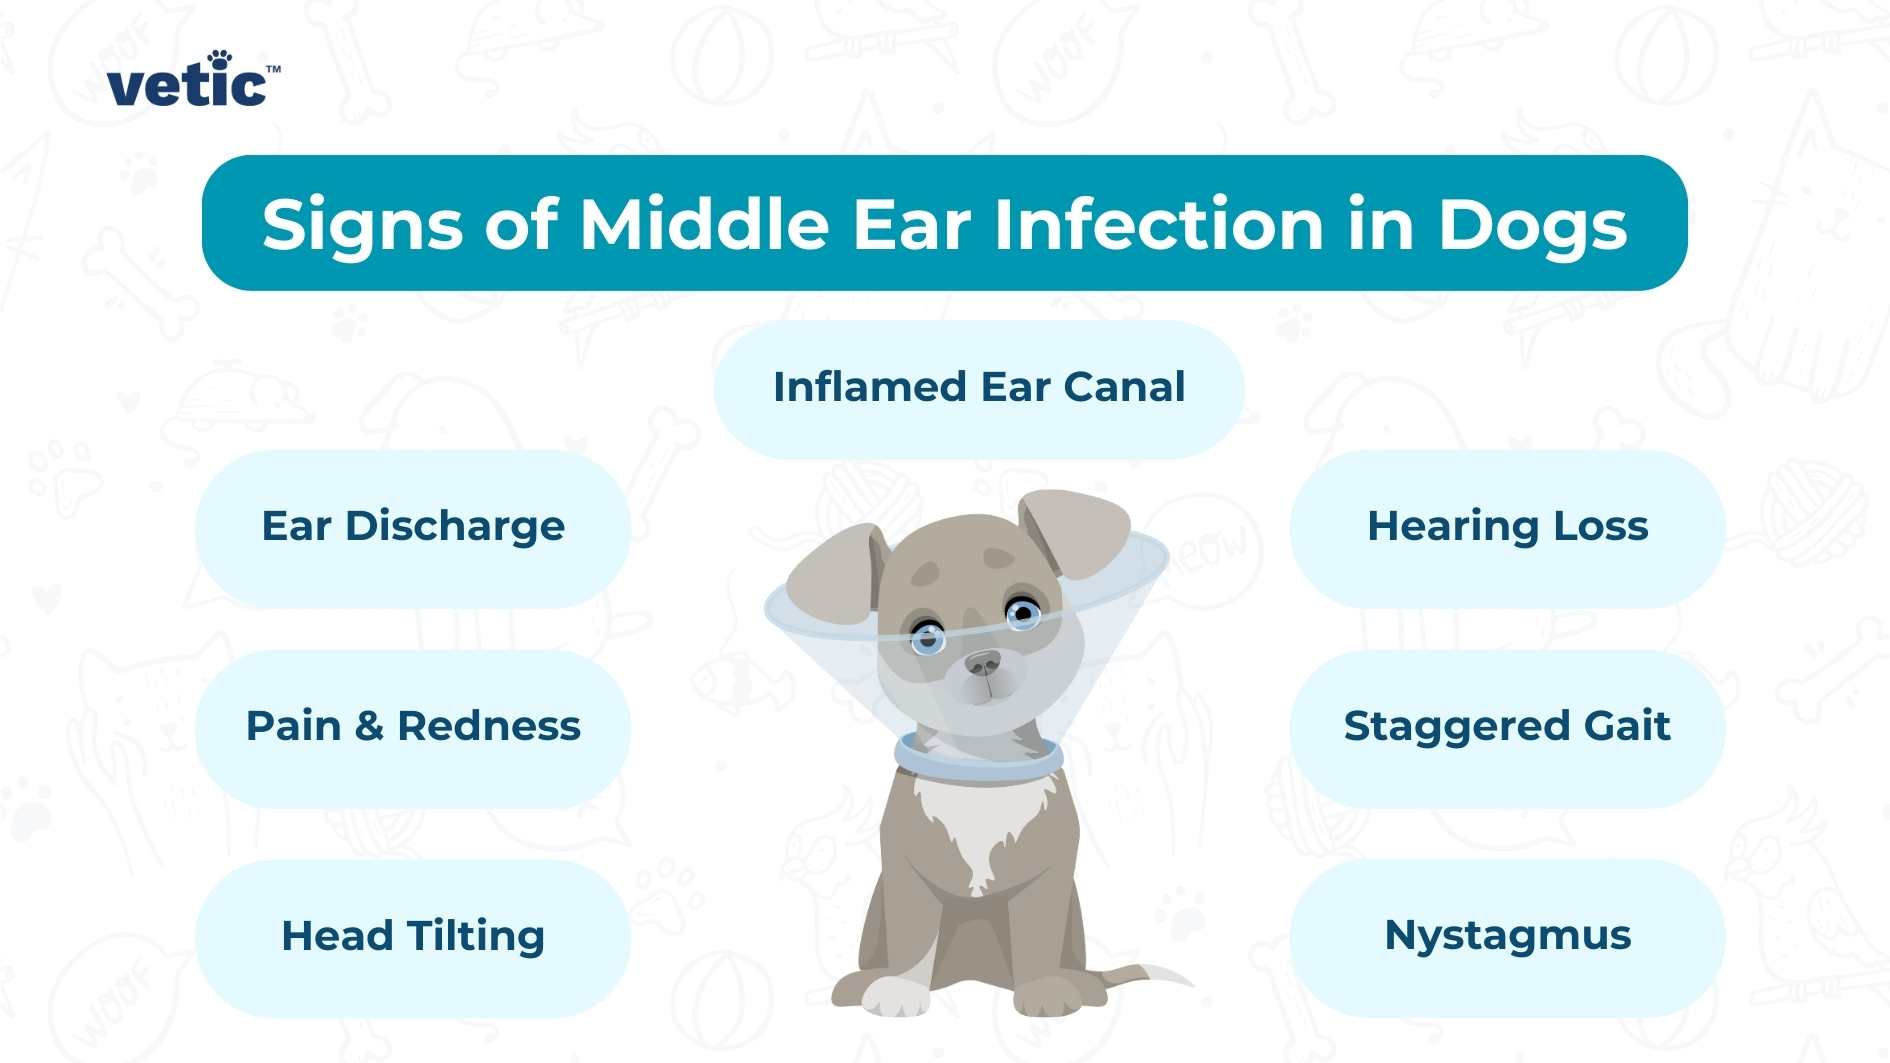 infographic by vetic on the signs of middle ear infection in dogs. the signs of otitis media in dogs include - Discharge from the ears Loss of hearing Inflamed ear canal Redness and pain Head tilting Staggered gait Nystagmus